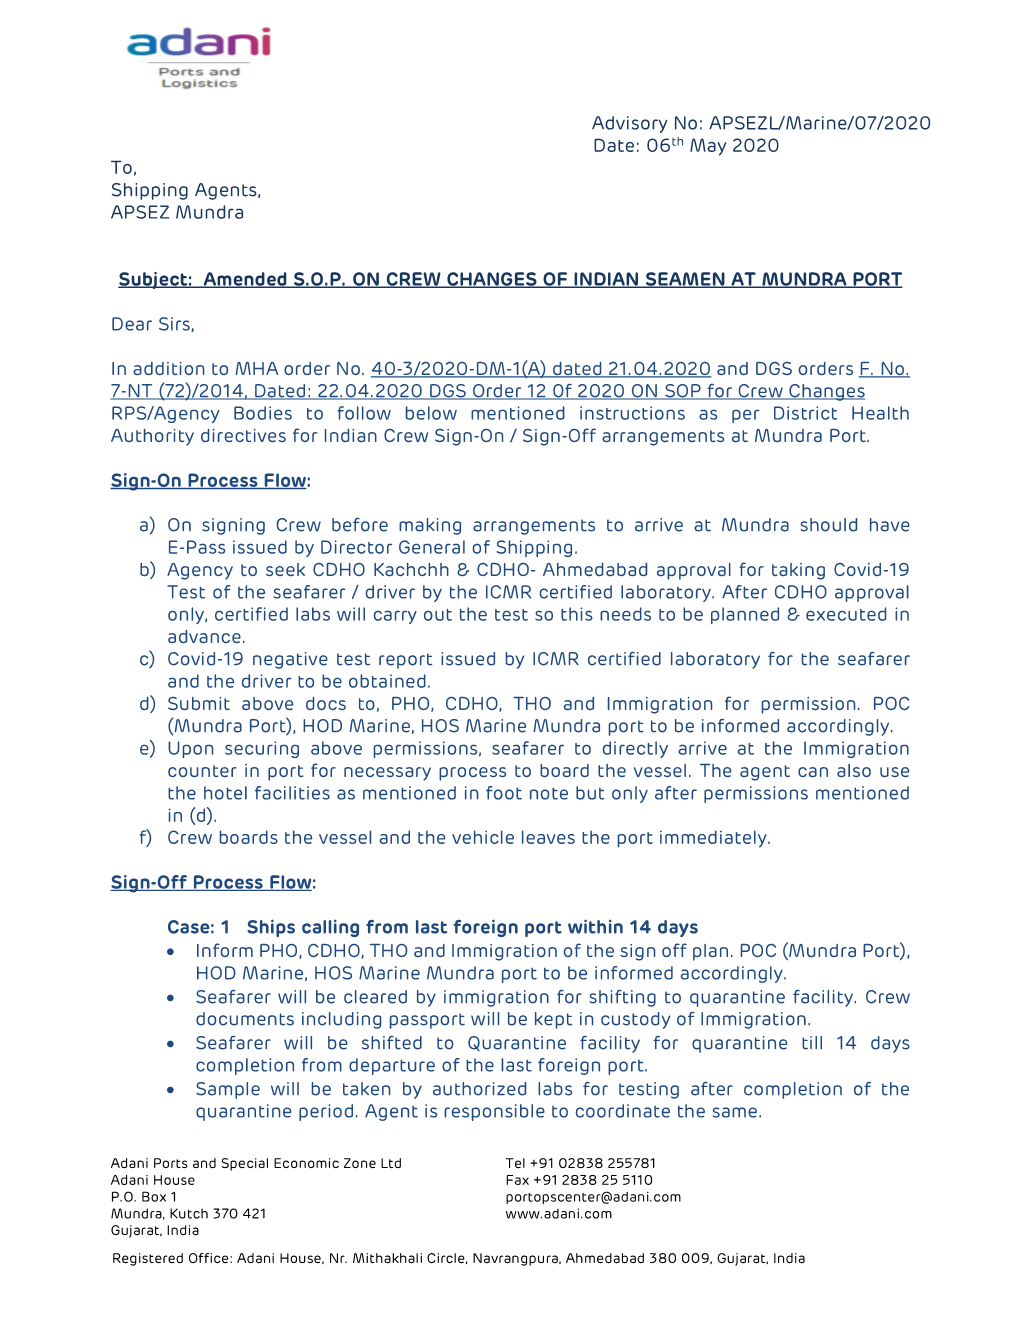 Trade Advisory 07 SOP for Crew Changes at Mundra Port Dated 06Th